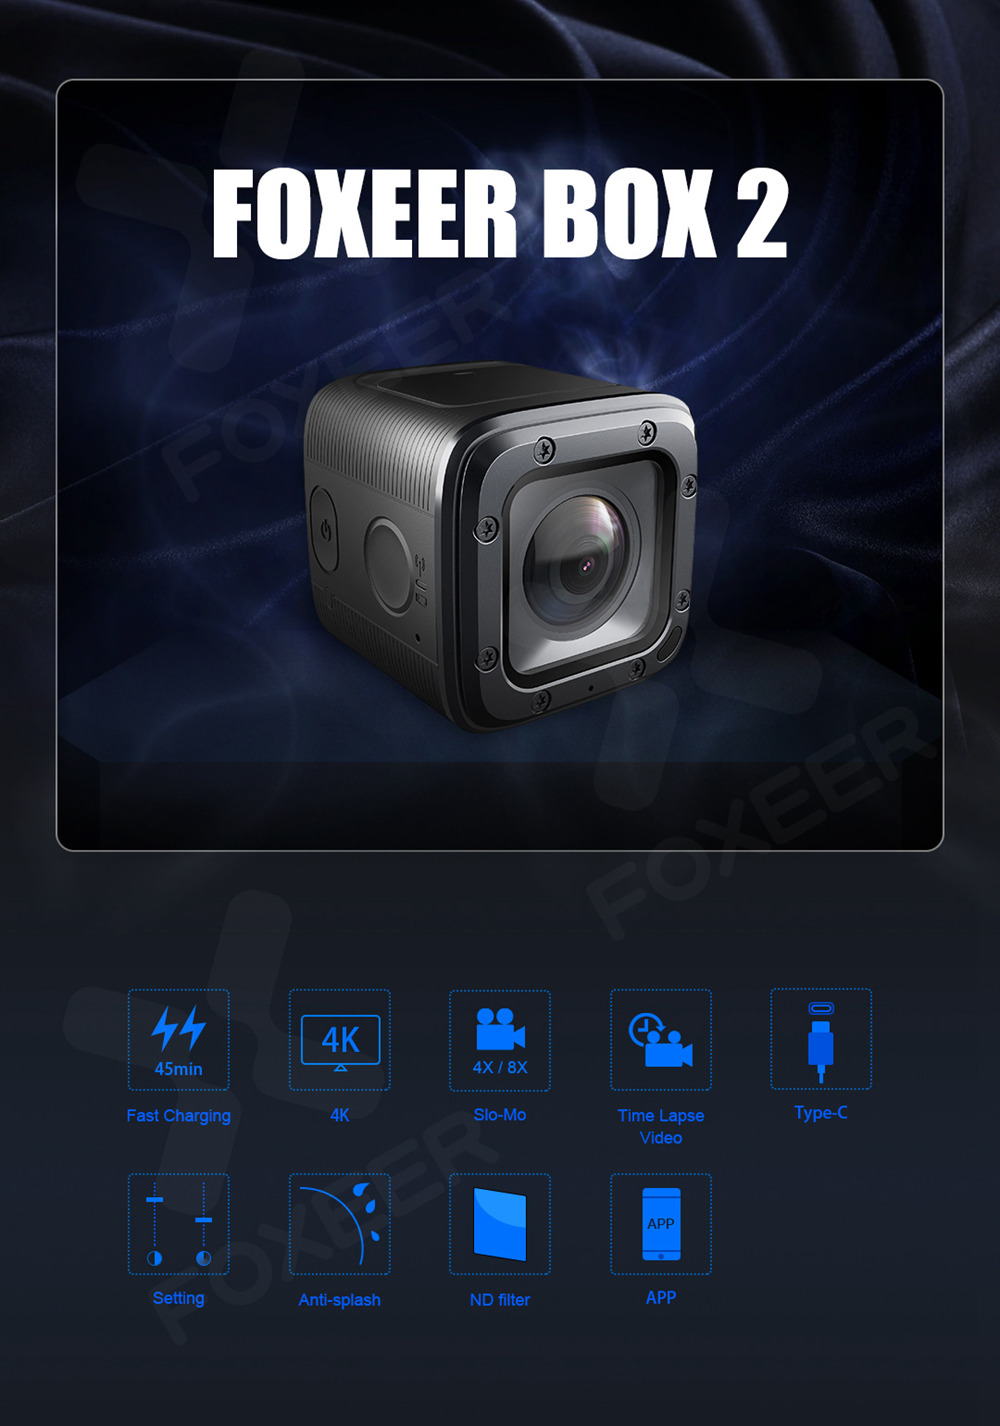 ND8 Filter For Foxeer BOX 1 And BOX 2